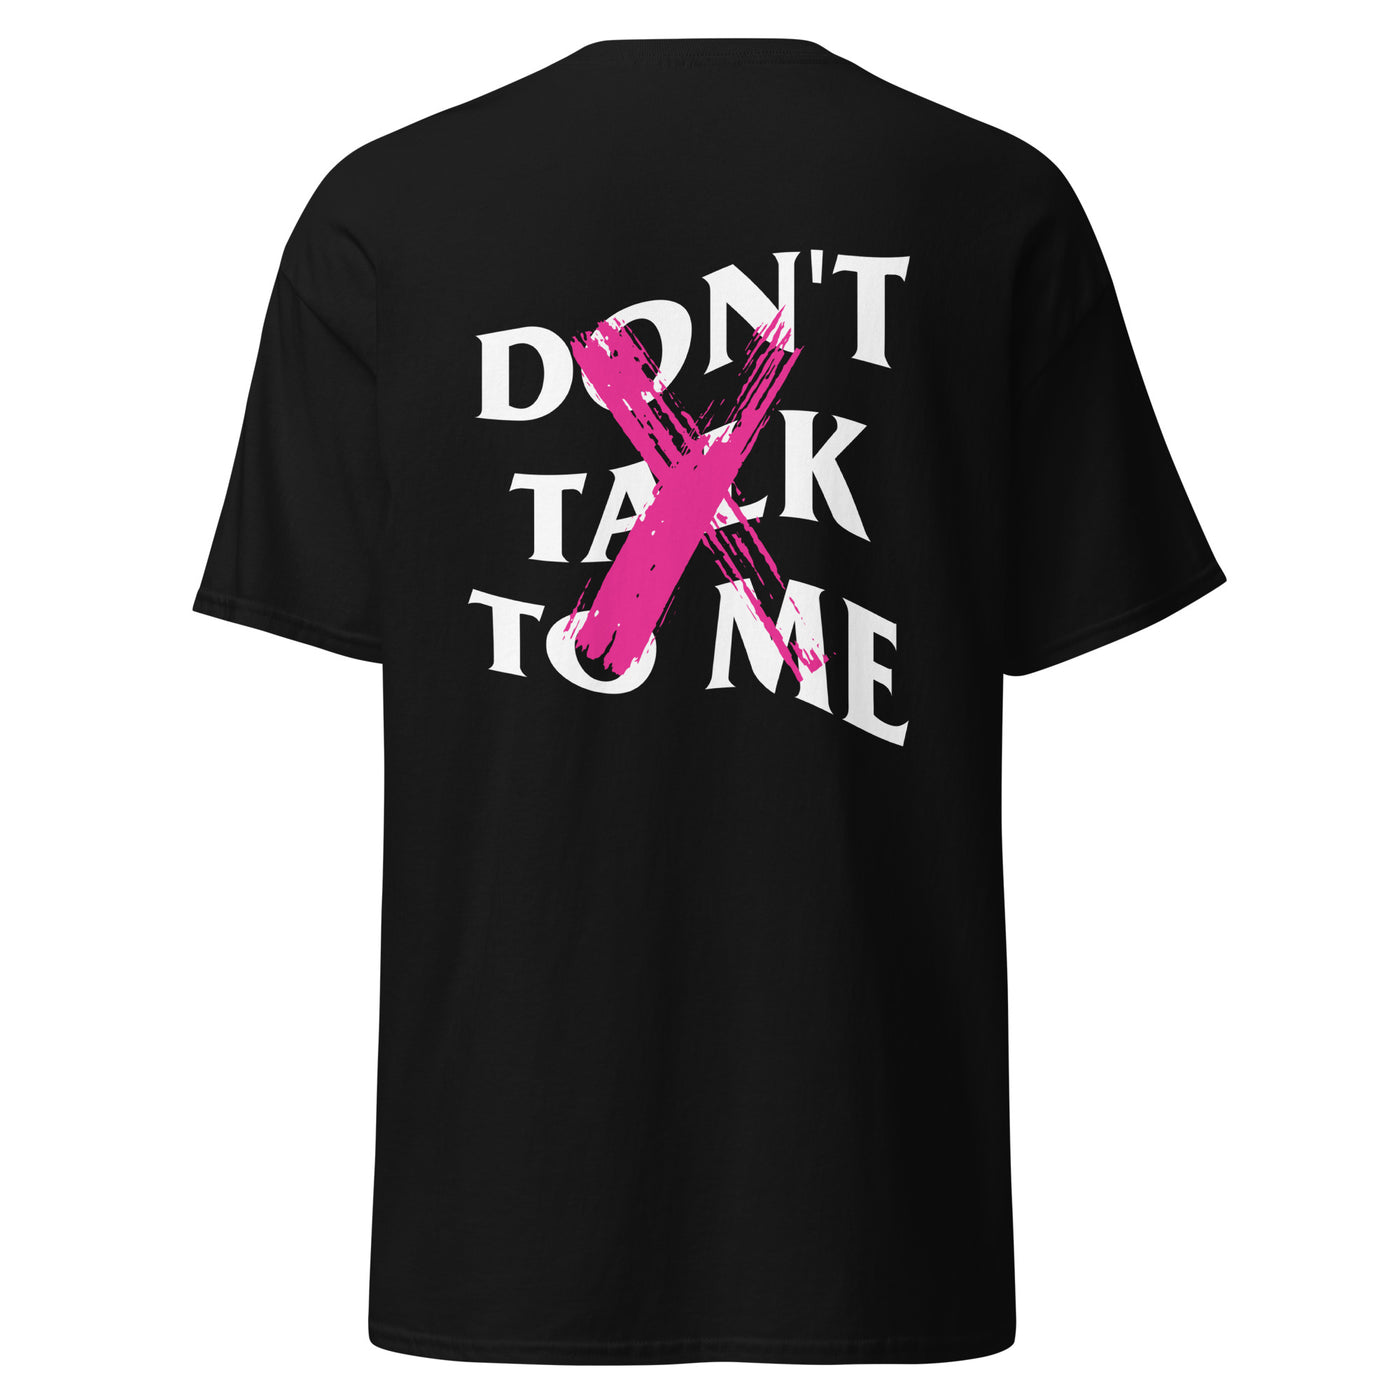 Don't Talk To Me Tee